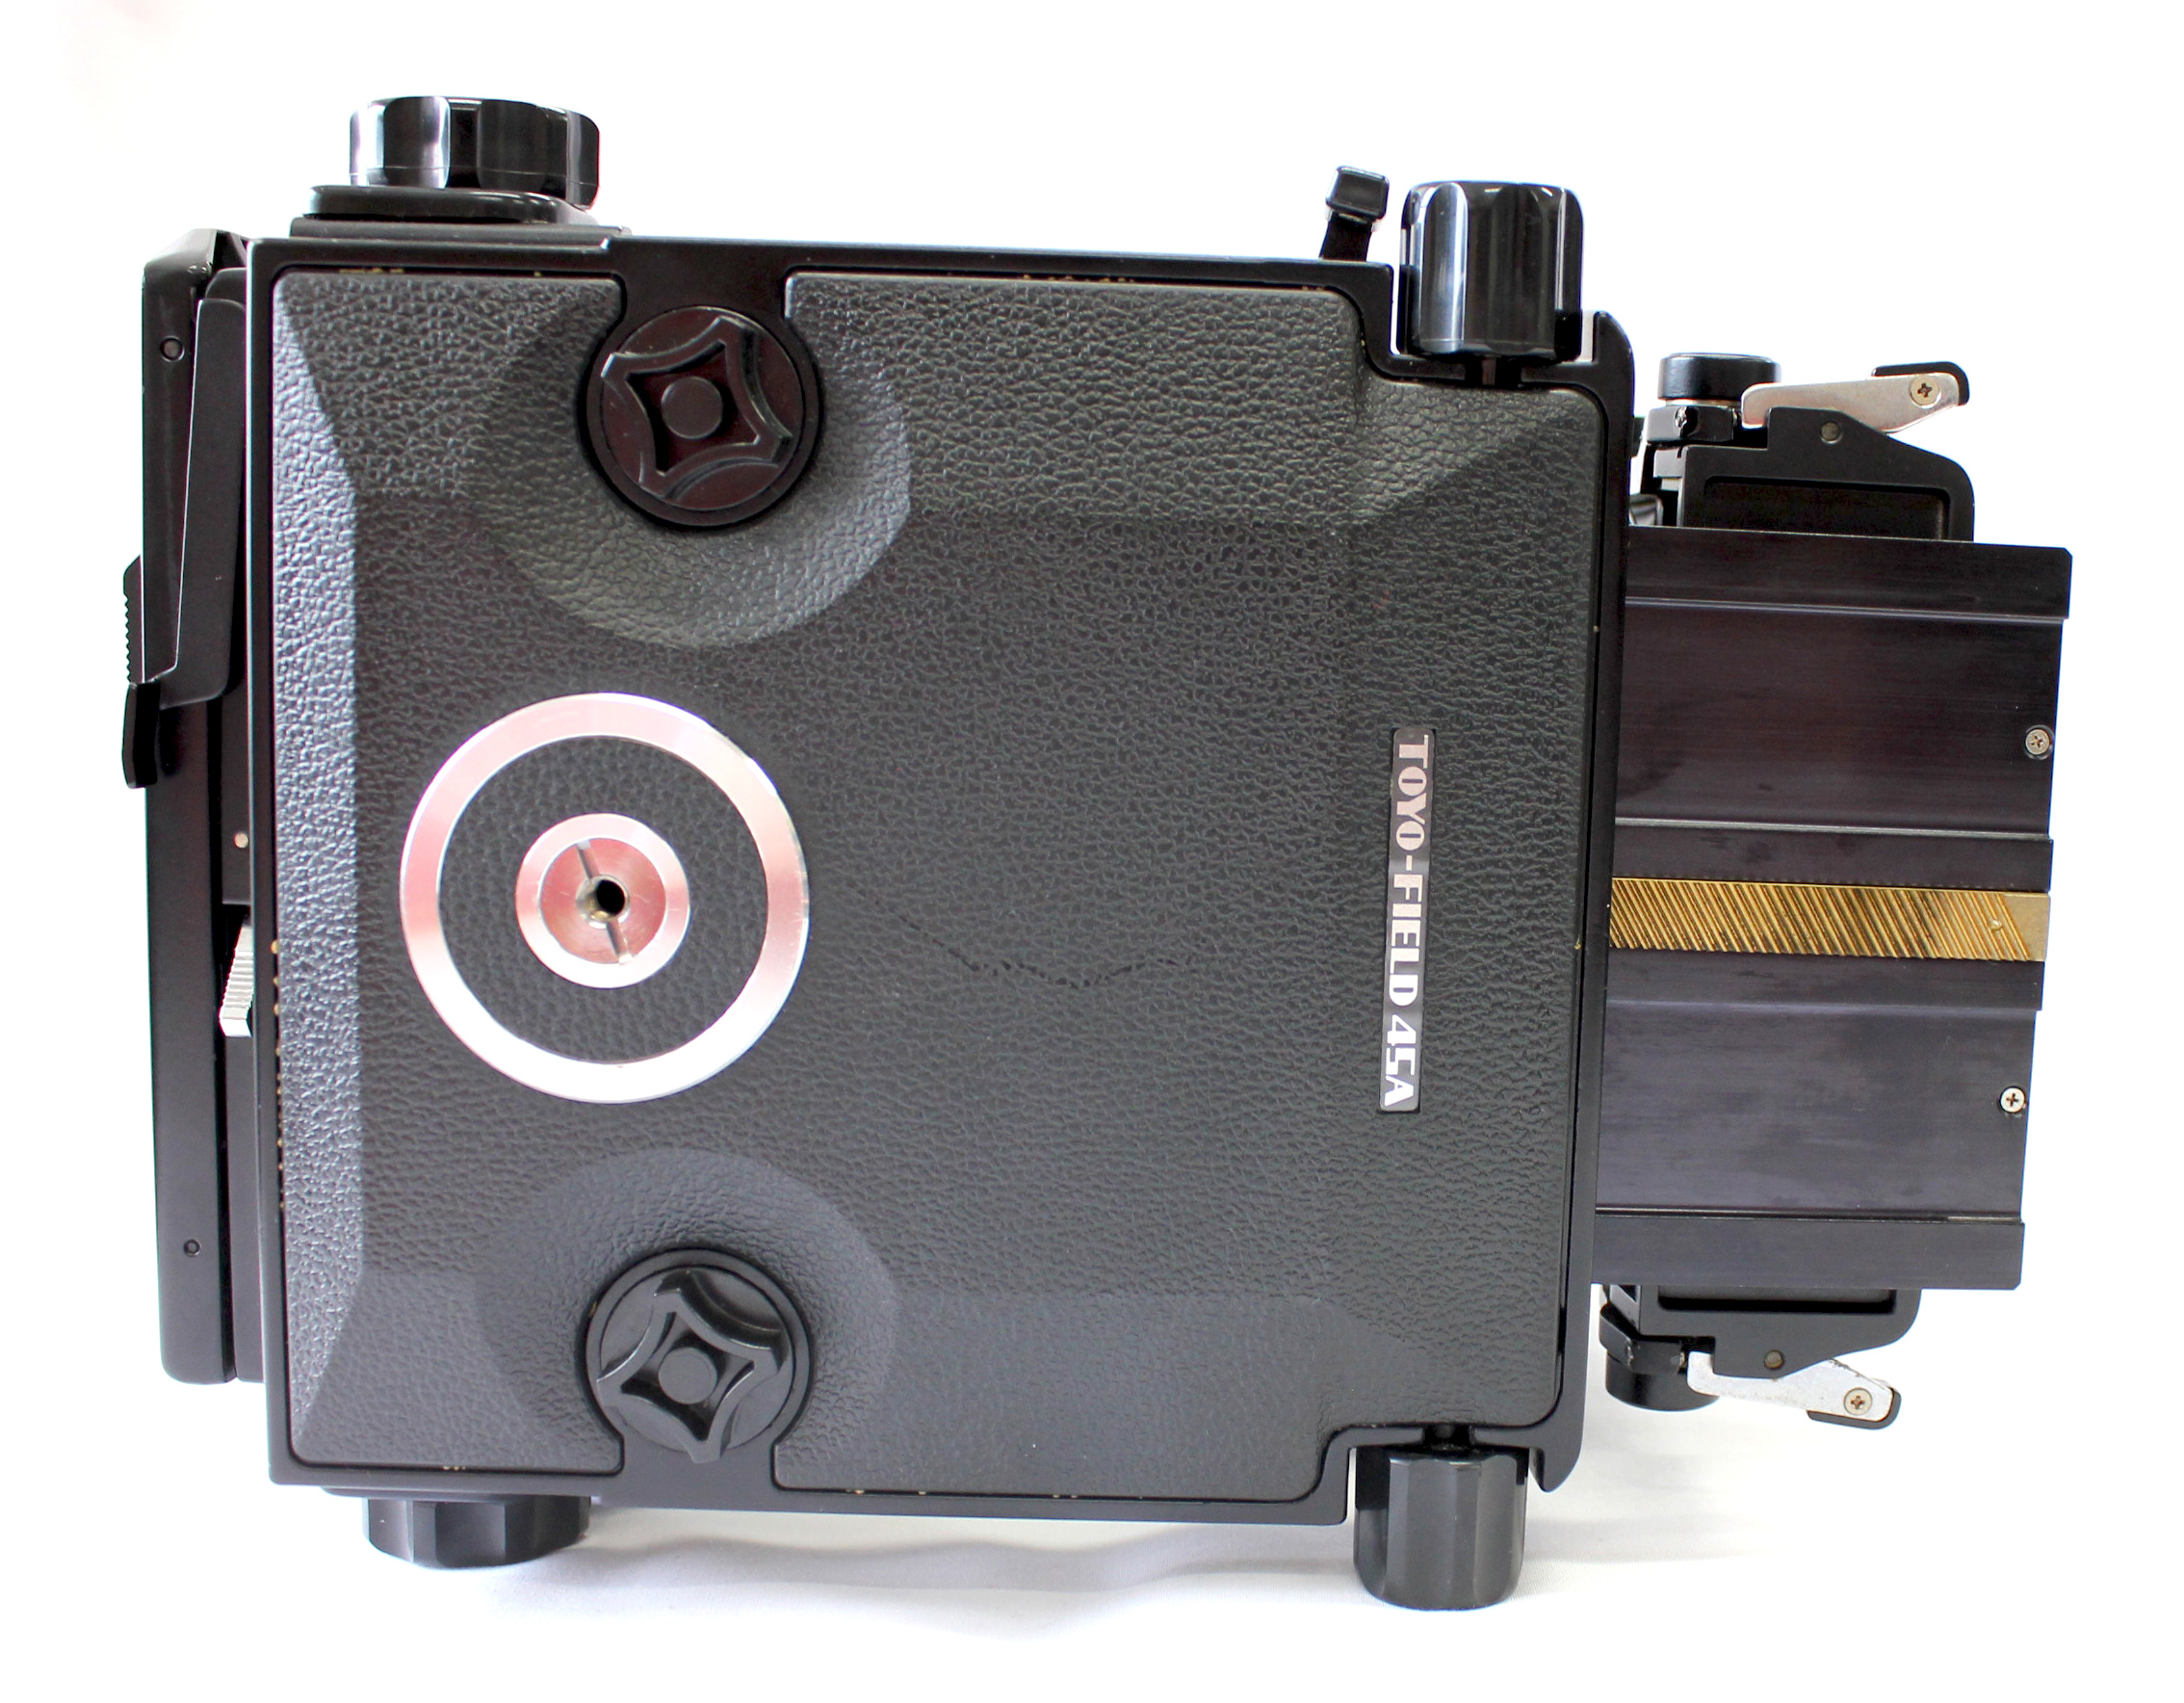  Toyo Field 45A 4x5 Large Format Film Camera with Revolving Back and 3 Cut Film Holders from Japan Photo 5